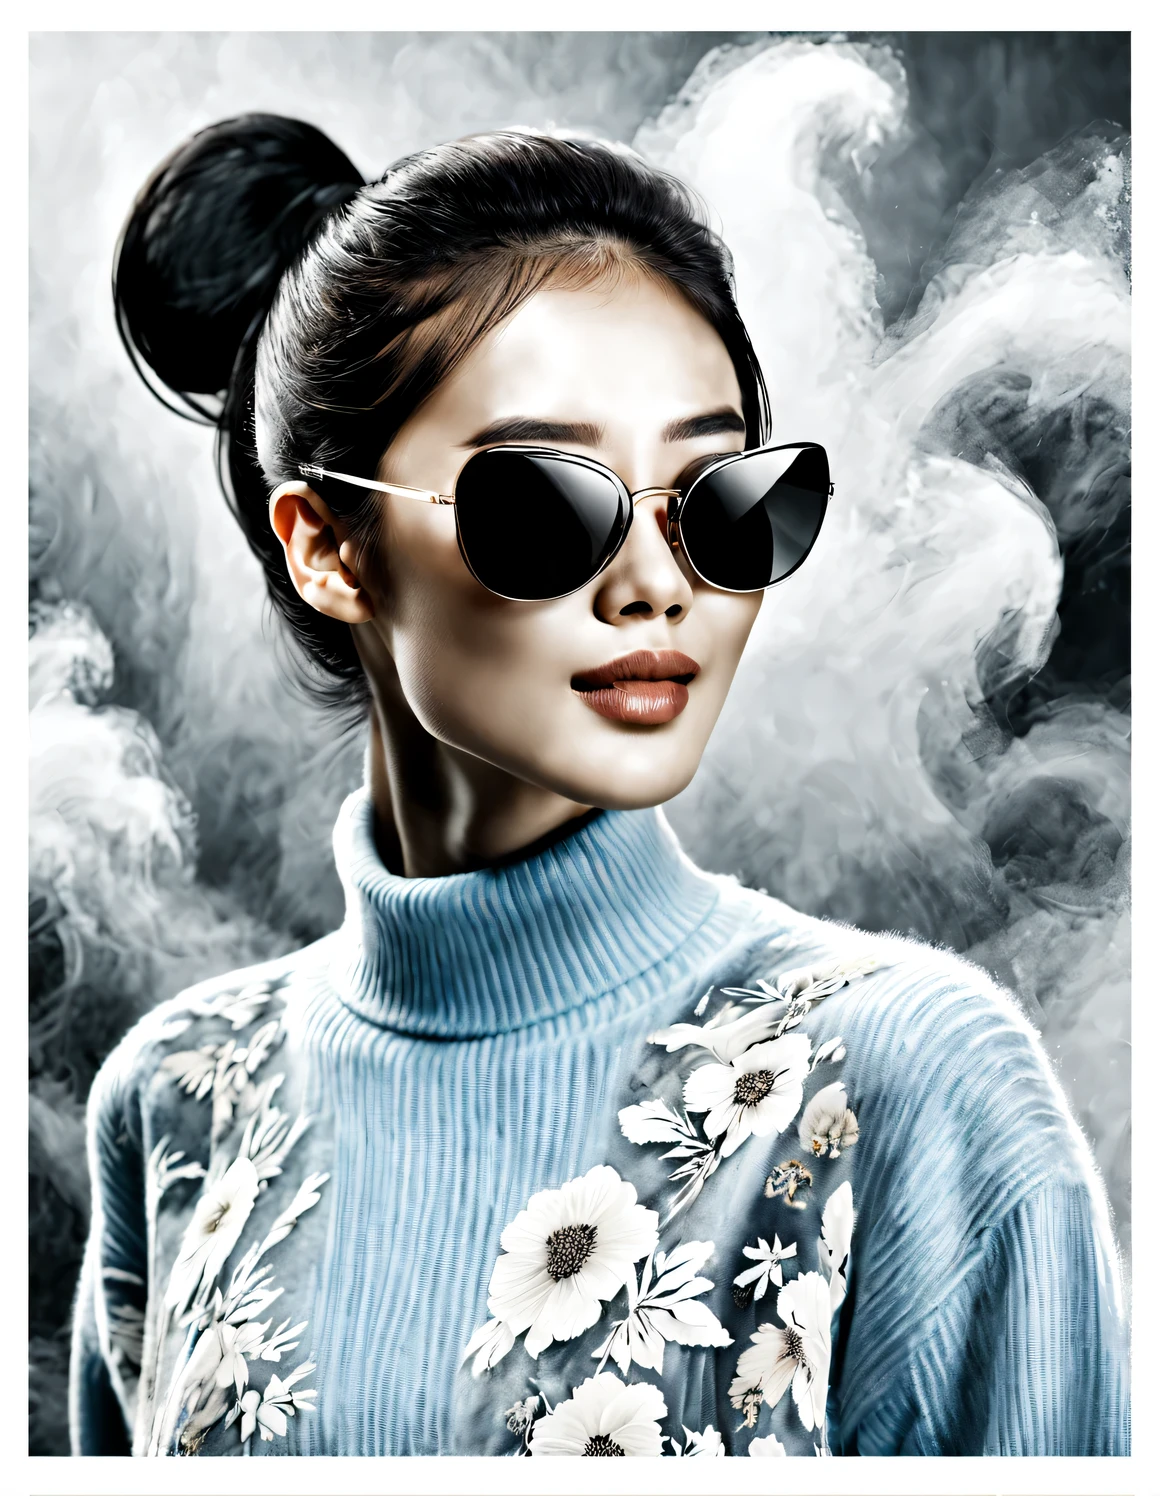 (Modern art dance simple poster design), (Half-length close-up), (Beautiful Chinese girl smiles), (wearing sunglasses: 1.37), (high ponytail: 1.2) The pastel tones of a light blue jacket and an off-white floral sweater blend together, The black and white plaid pants also have a sharp contrast, Characterized by exquisite details and layering, Both fashionable and softly feminine. Wear modern and stylish winter fashion, thin waist, high nose bridge, Head up posture, sad yet beautiful, slender figure, Exquisite facial features,
Background briefcase dancing, fog illustration, ink painting, black hair, Proud, Surrealism, contemporary art photography, action painting illustration, abstract expressionism, Pixar, depth of field, motion blur, backlight, Falling shadows, Vignetting, Elevation viewing angle, Sony FE General Manager, ultra high definition, masterpiece, Accuracy, textured skin, Super details, high detail, high quality, Award-winning, best quality, Level, 16k, Photographed from a bottom-up perspective,